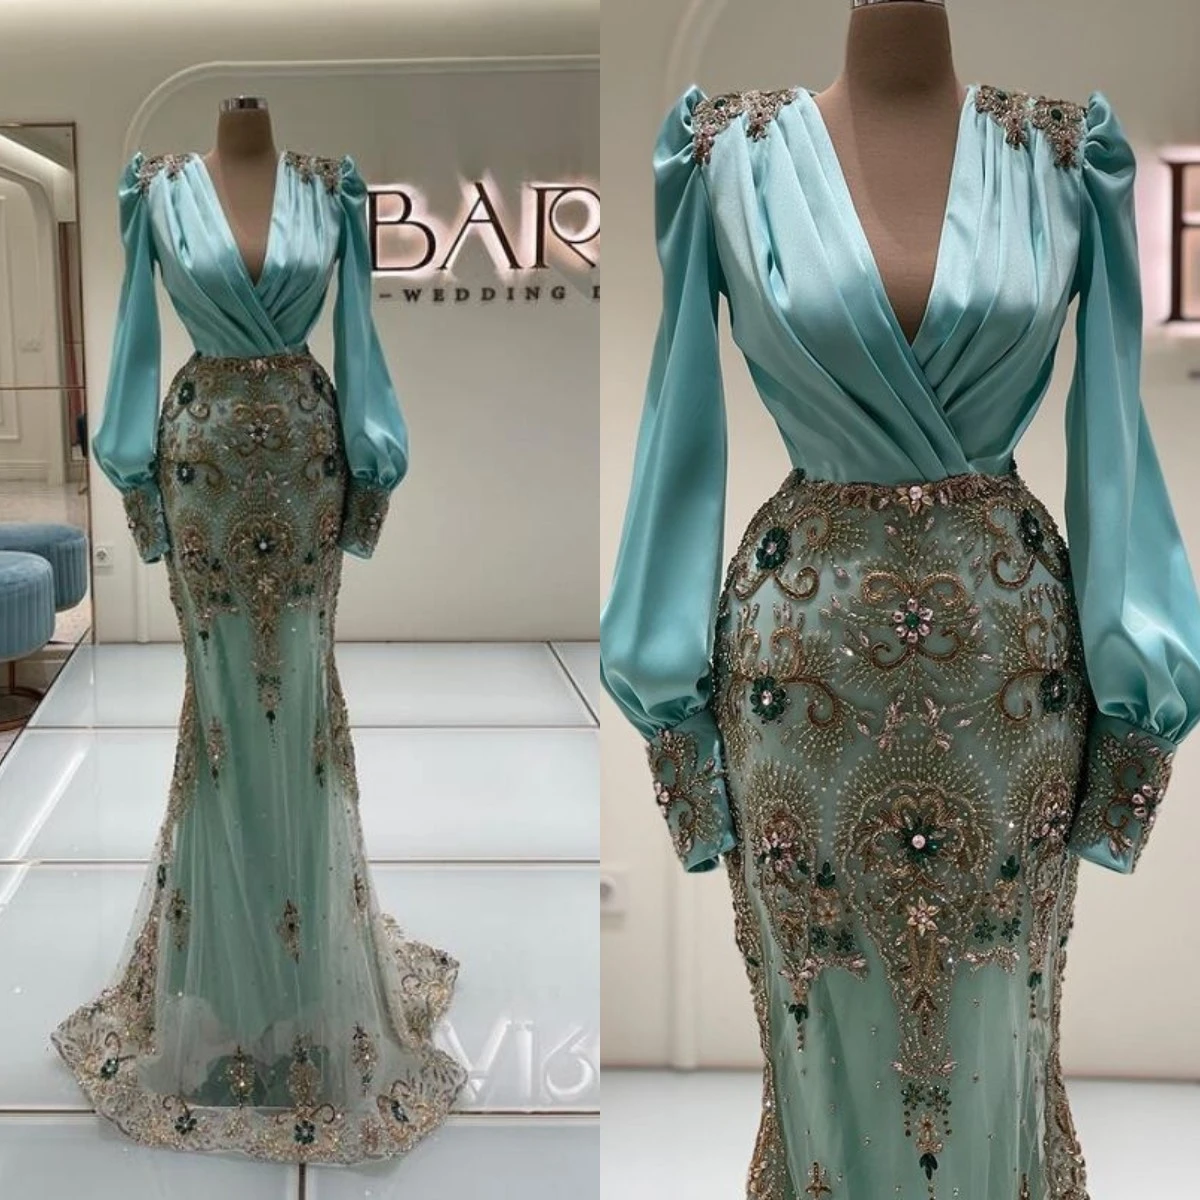 silver prom dresses Luxury Beading Mermaid Prom Dresses Long Sleeve Sexy Deep V Neck Evening Dress Party Wear Sweep Train Gowns green prom dress